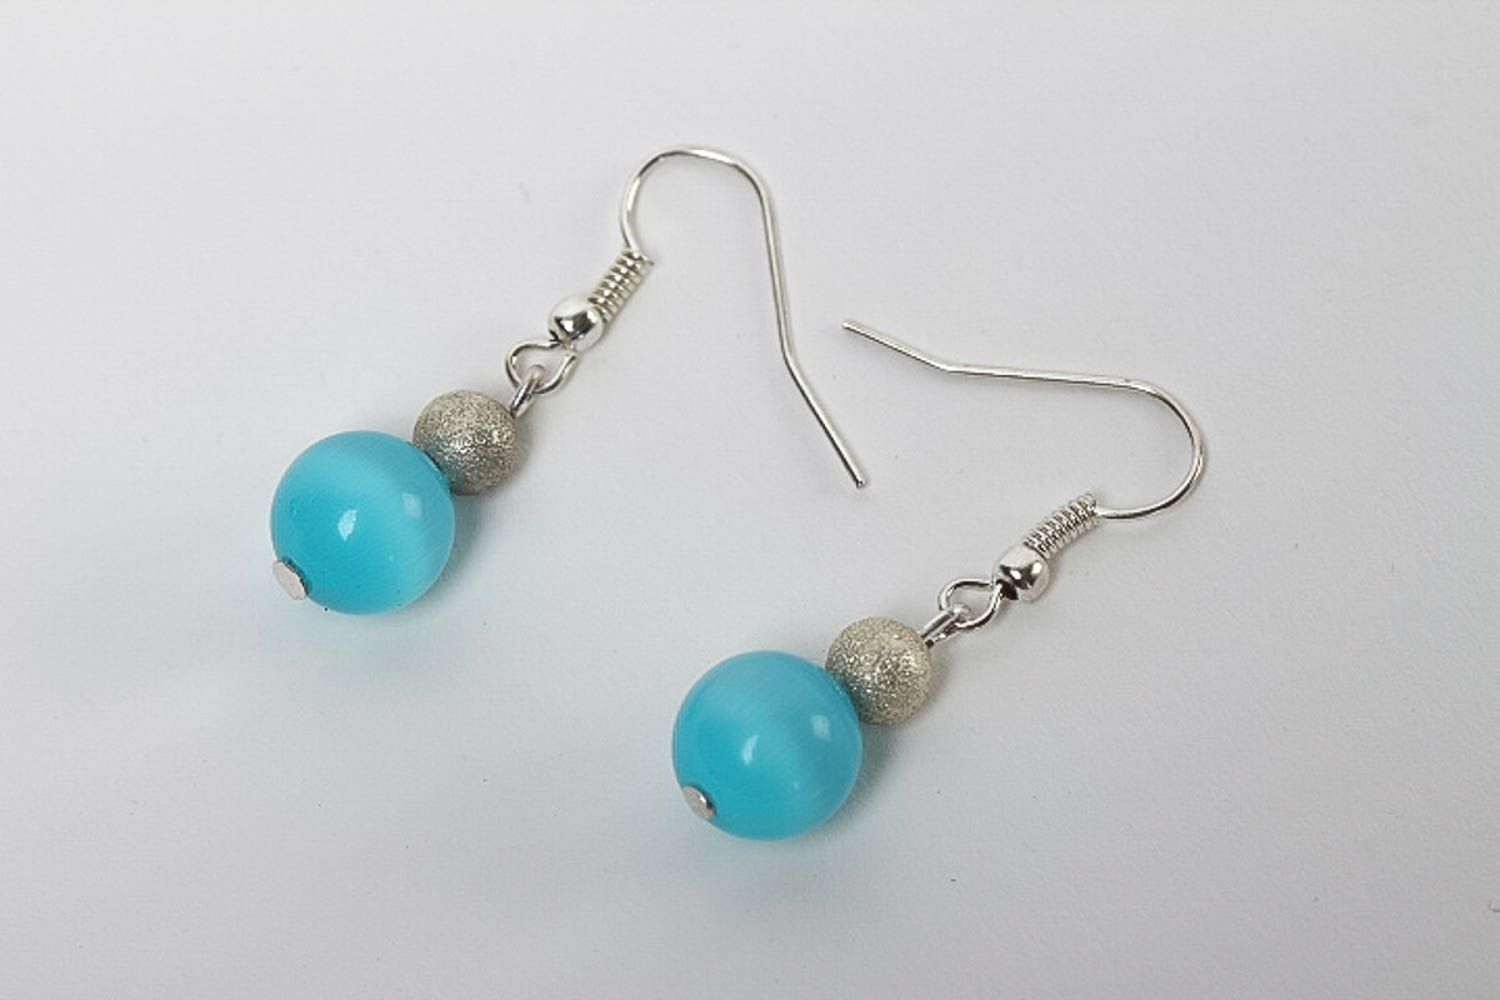 Dangling earrings ball earrings handcrafted jewelry fashion accessories photo 2